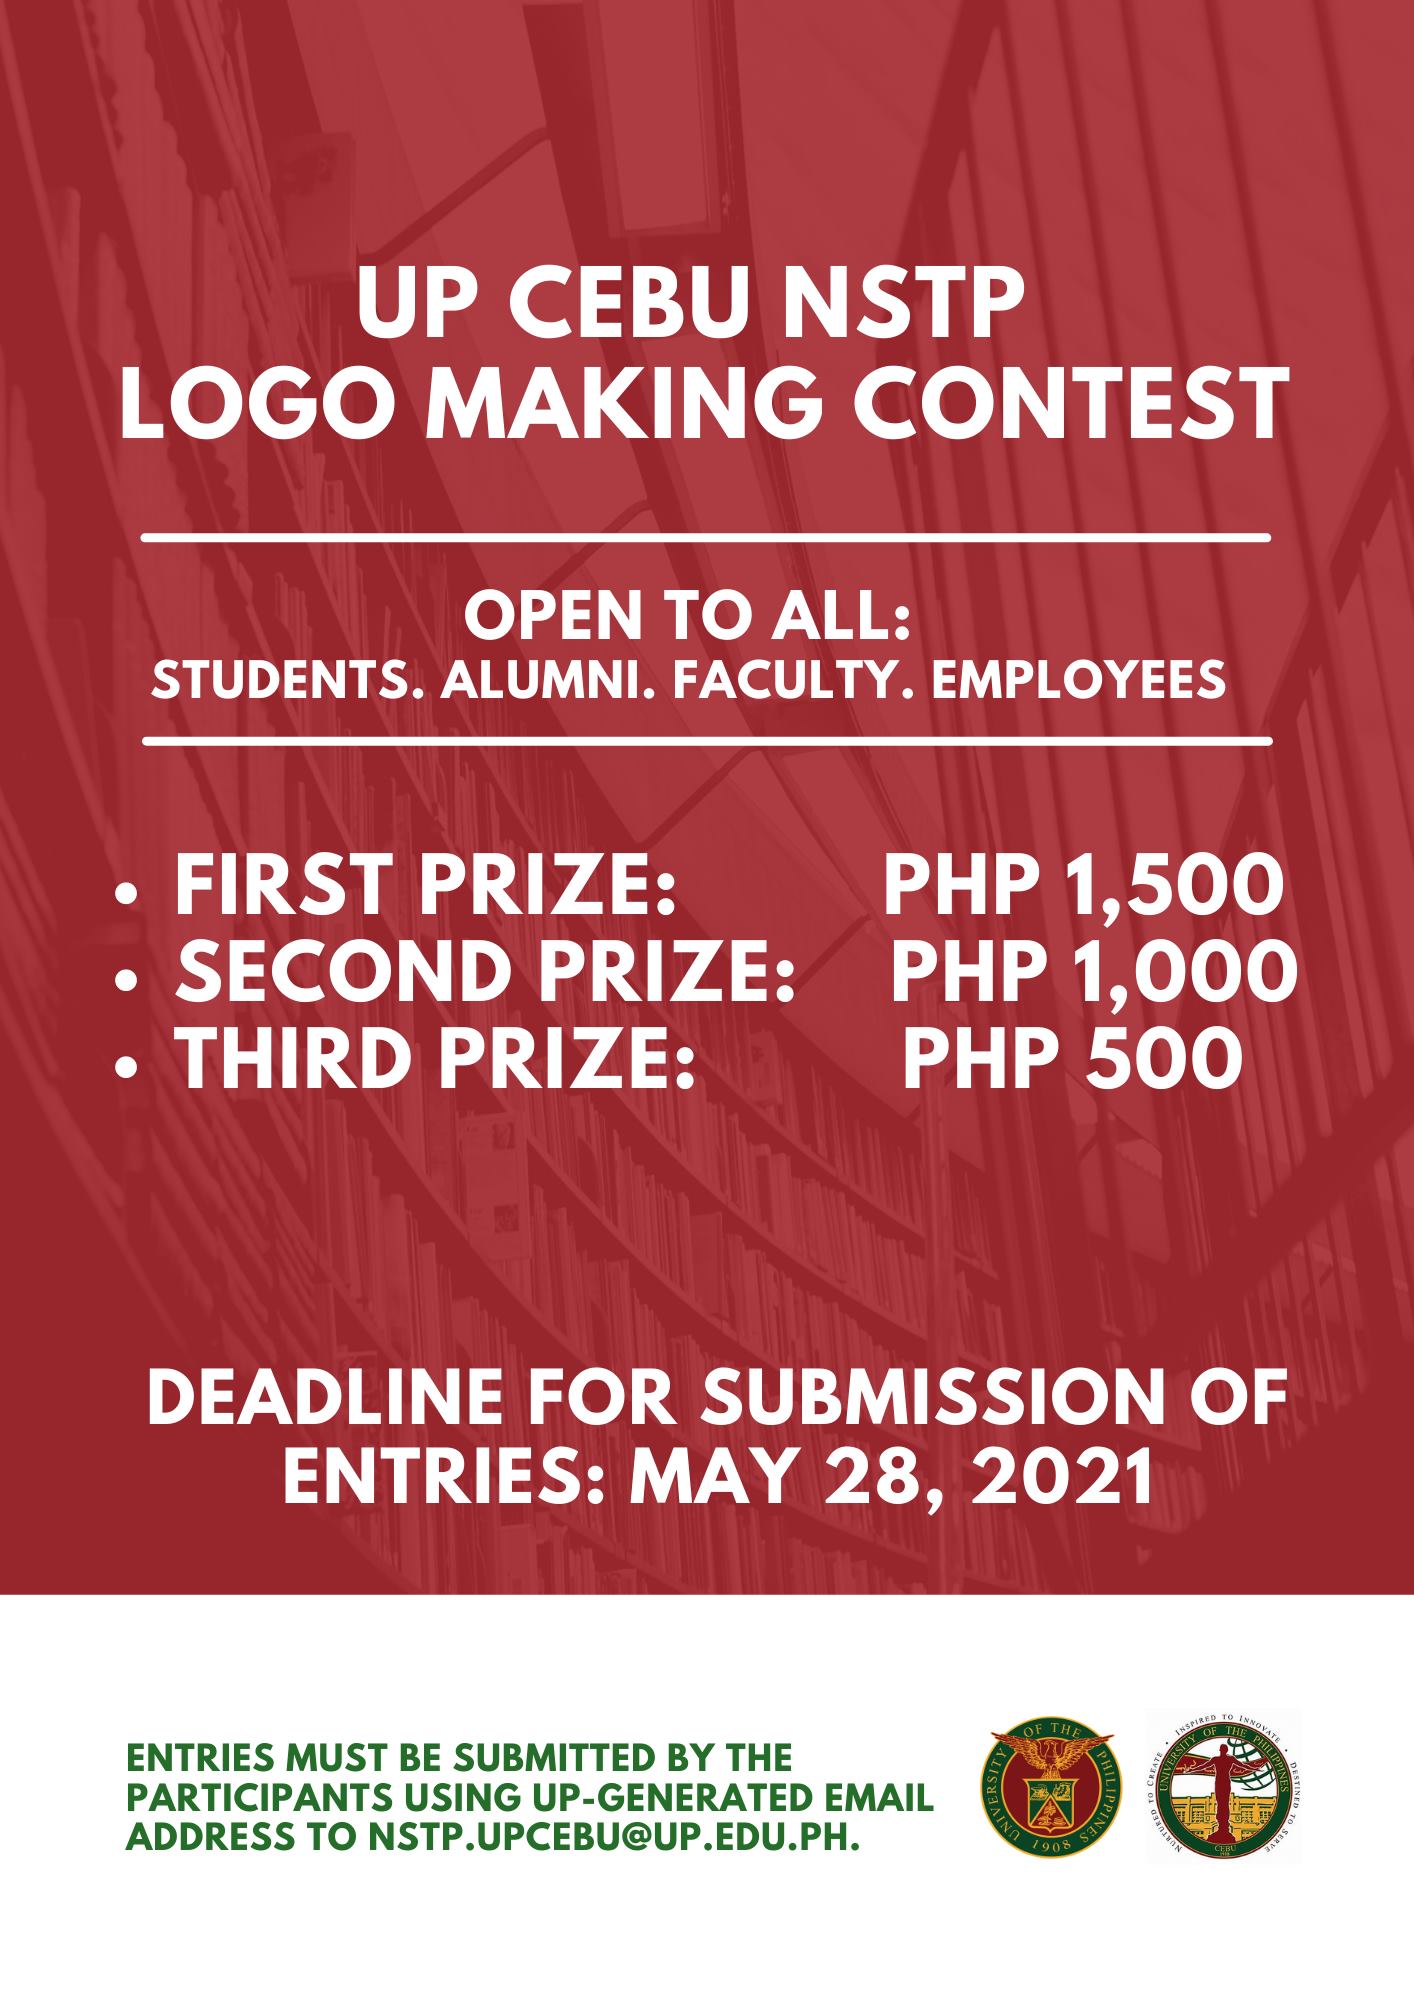 Guidelines for the UP Cebu NSTP-CWTS Logo Making Contest